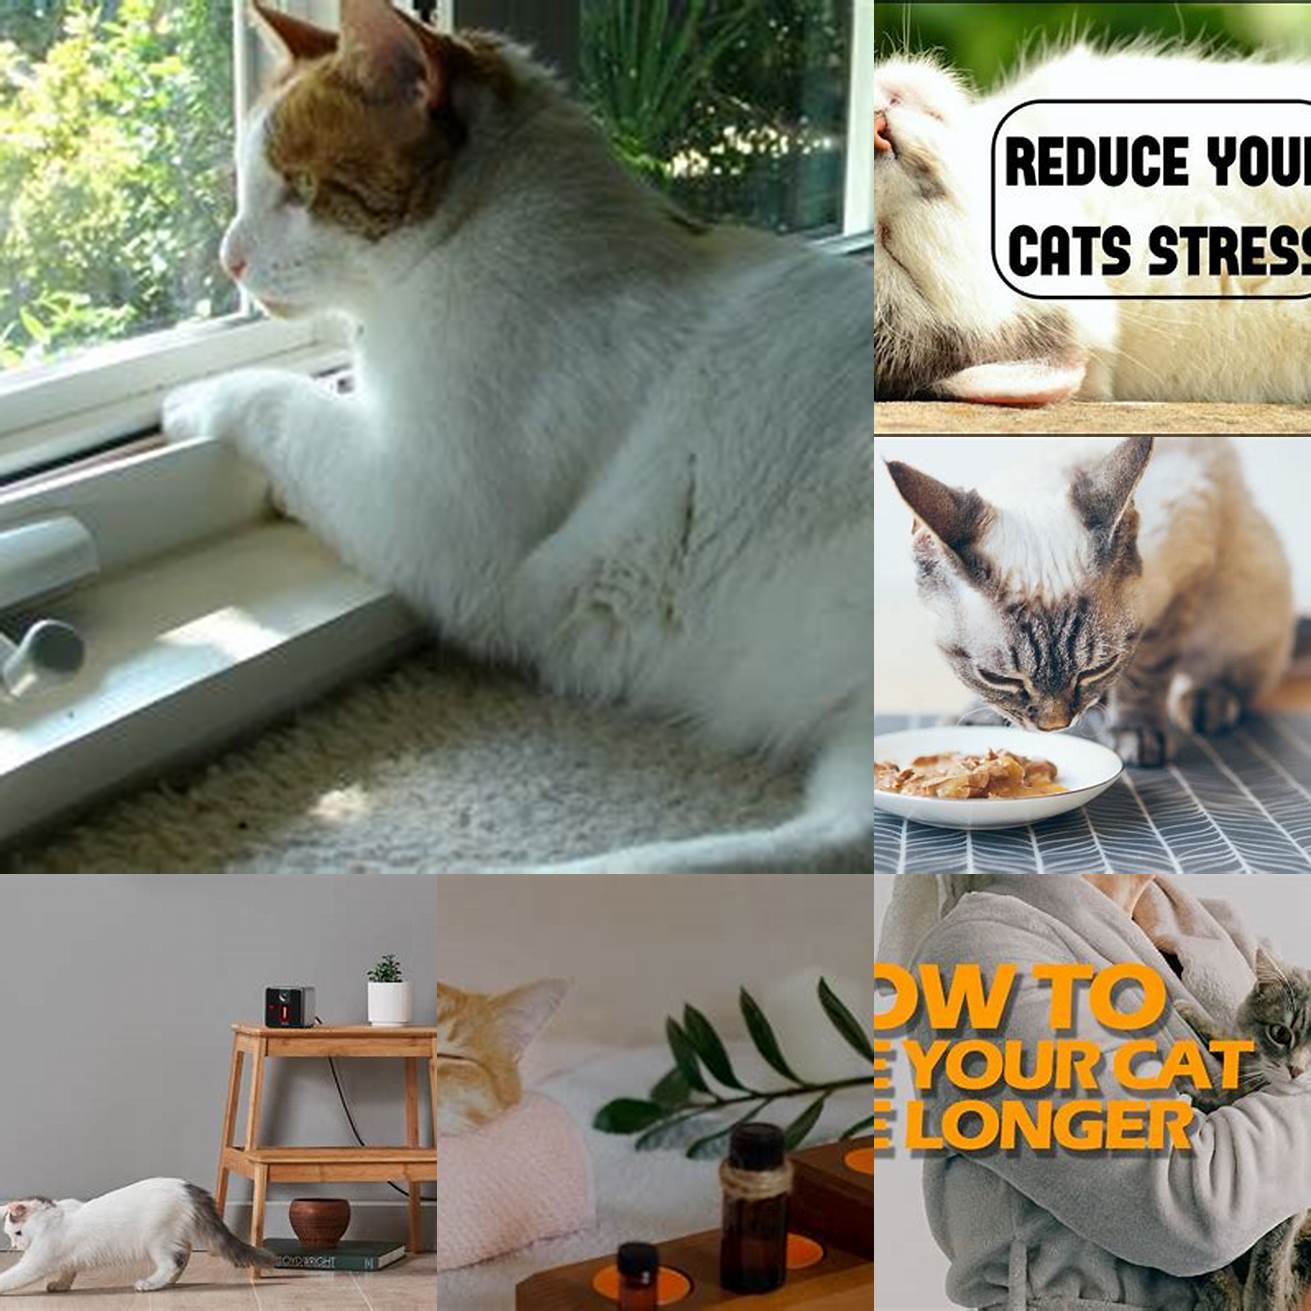 Environment A safe and stress-free environment can help your cat live a happier and longer life